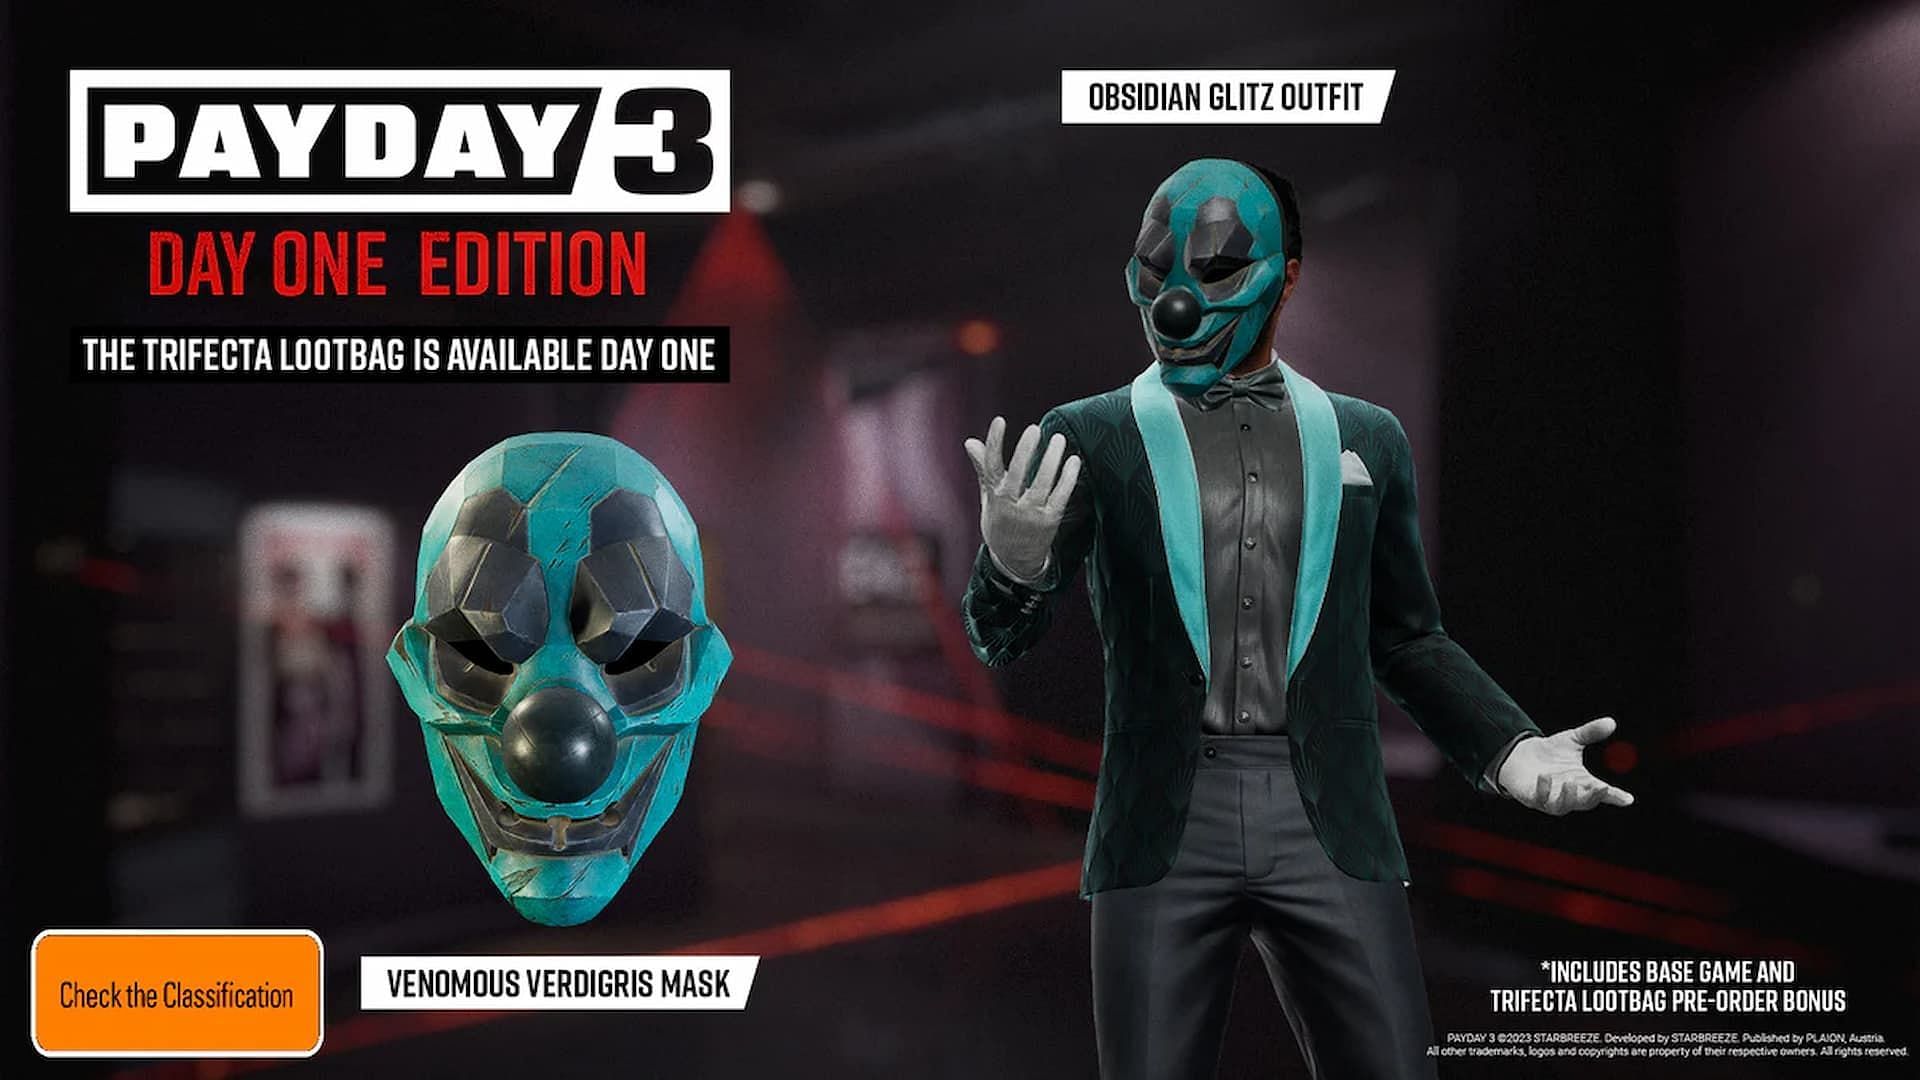 Day One Edition provides a physical copy of the game (Image via Starbreeze Studios)